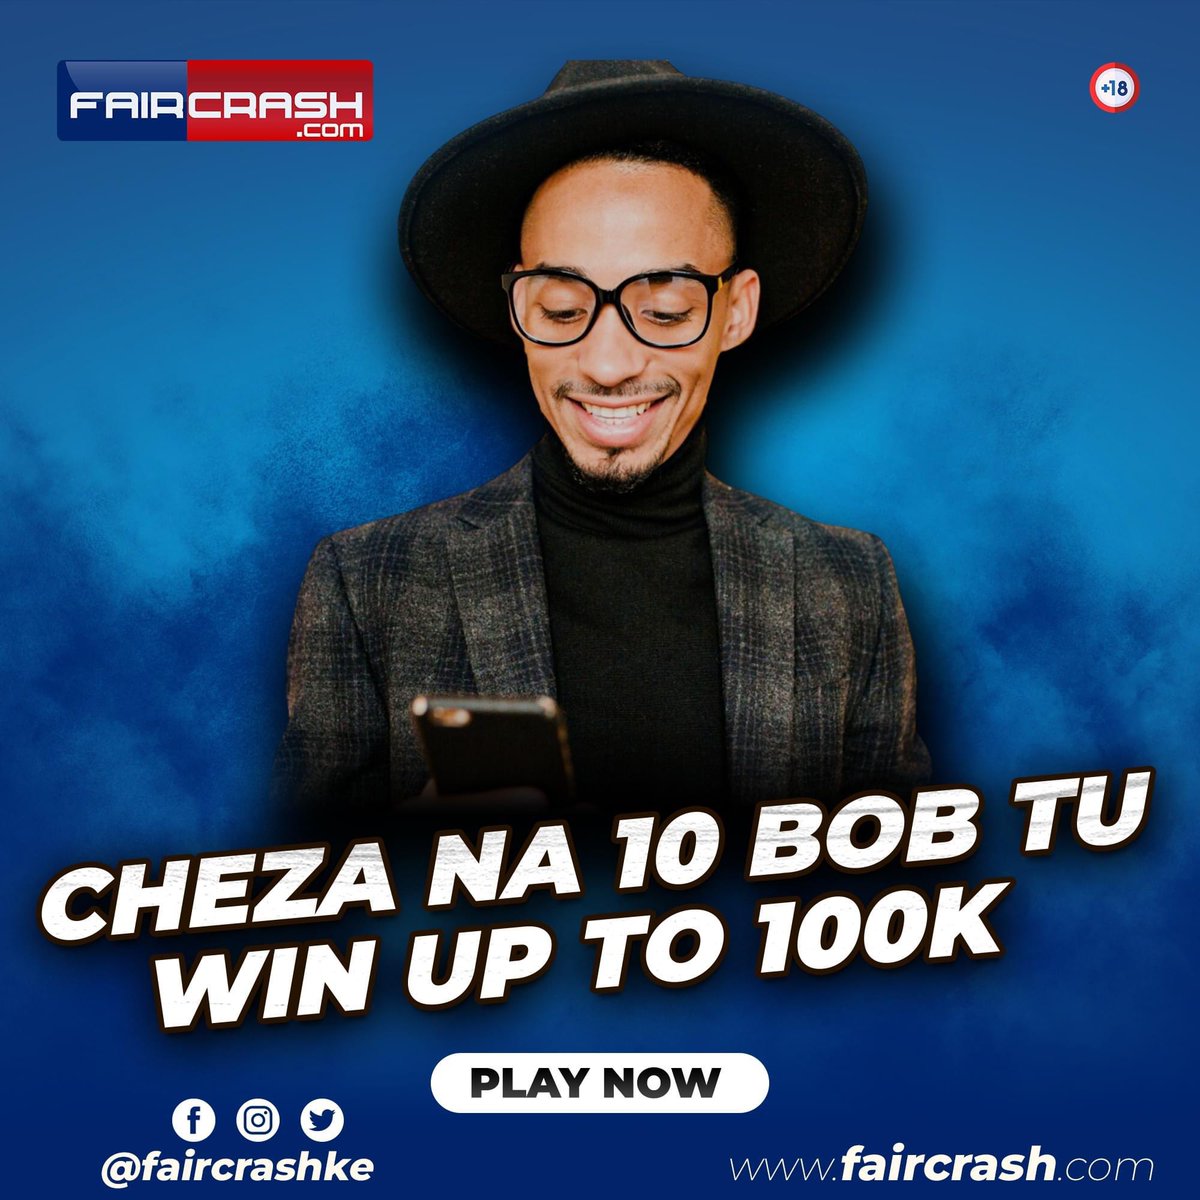 Here is your chance to Win up to Ksh 100,000 Daily, Ksh 500,000 Weekly when you Play faircrash.com 🥳 Simply register and deposit a minimum of Ksh 10 and Play! #faircrash #winbig #CrashGame #MultiplierMania #onlinegaming #fun #goals
#motivation 💯💯